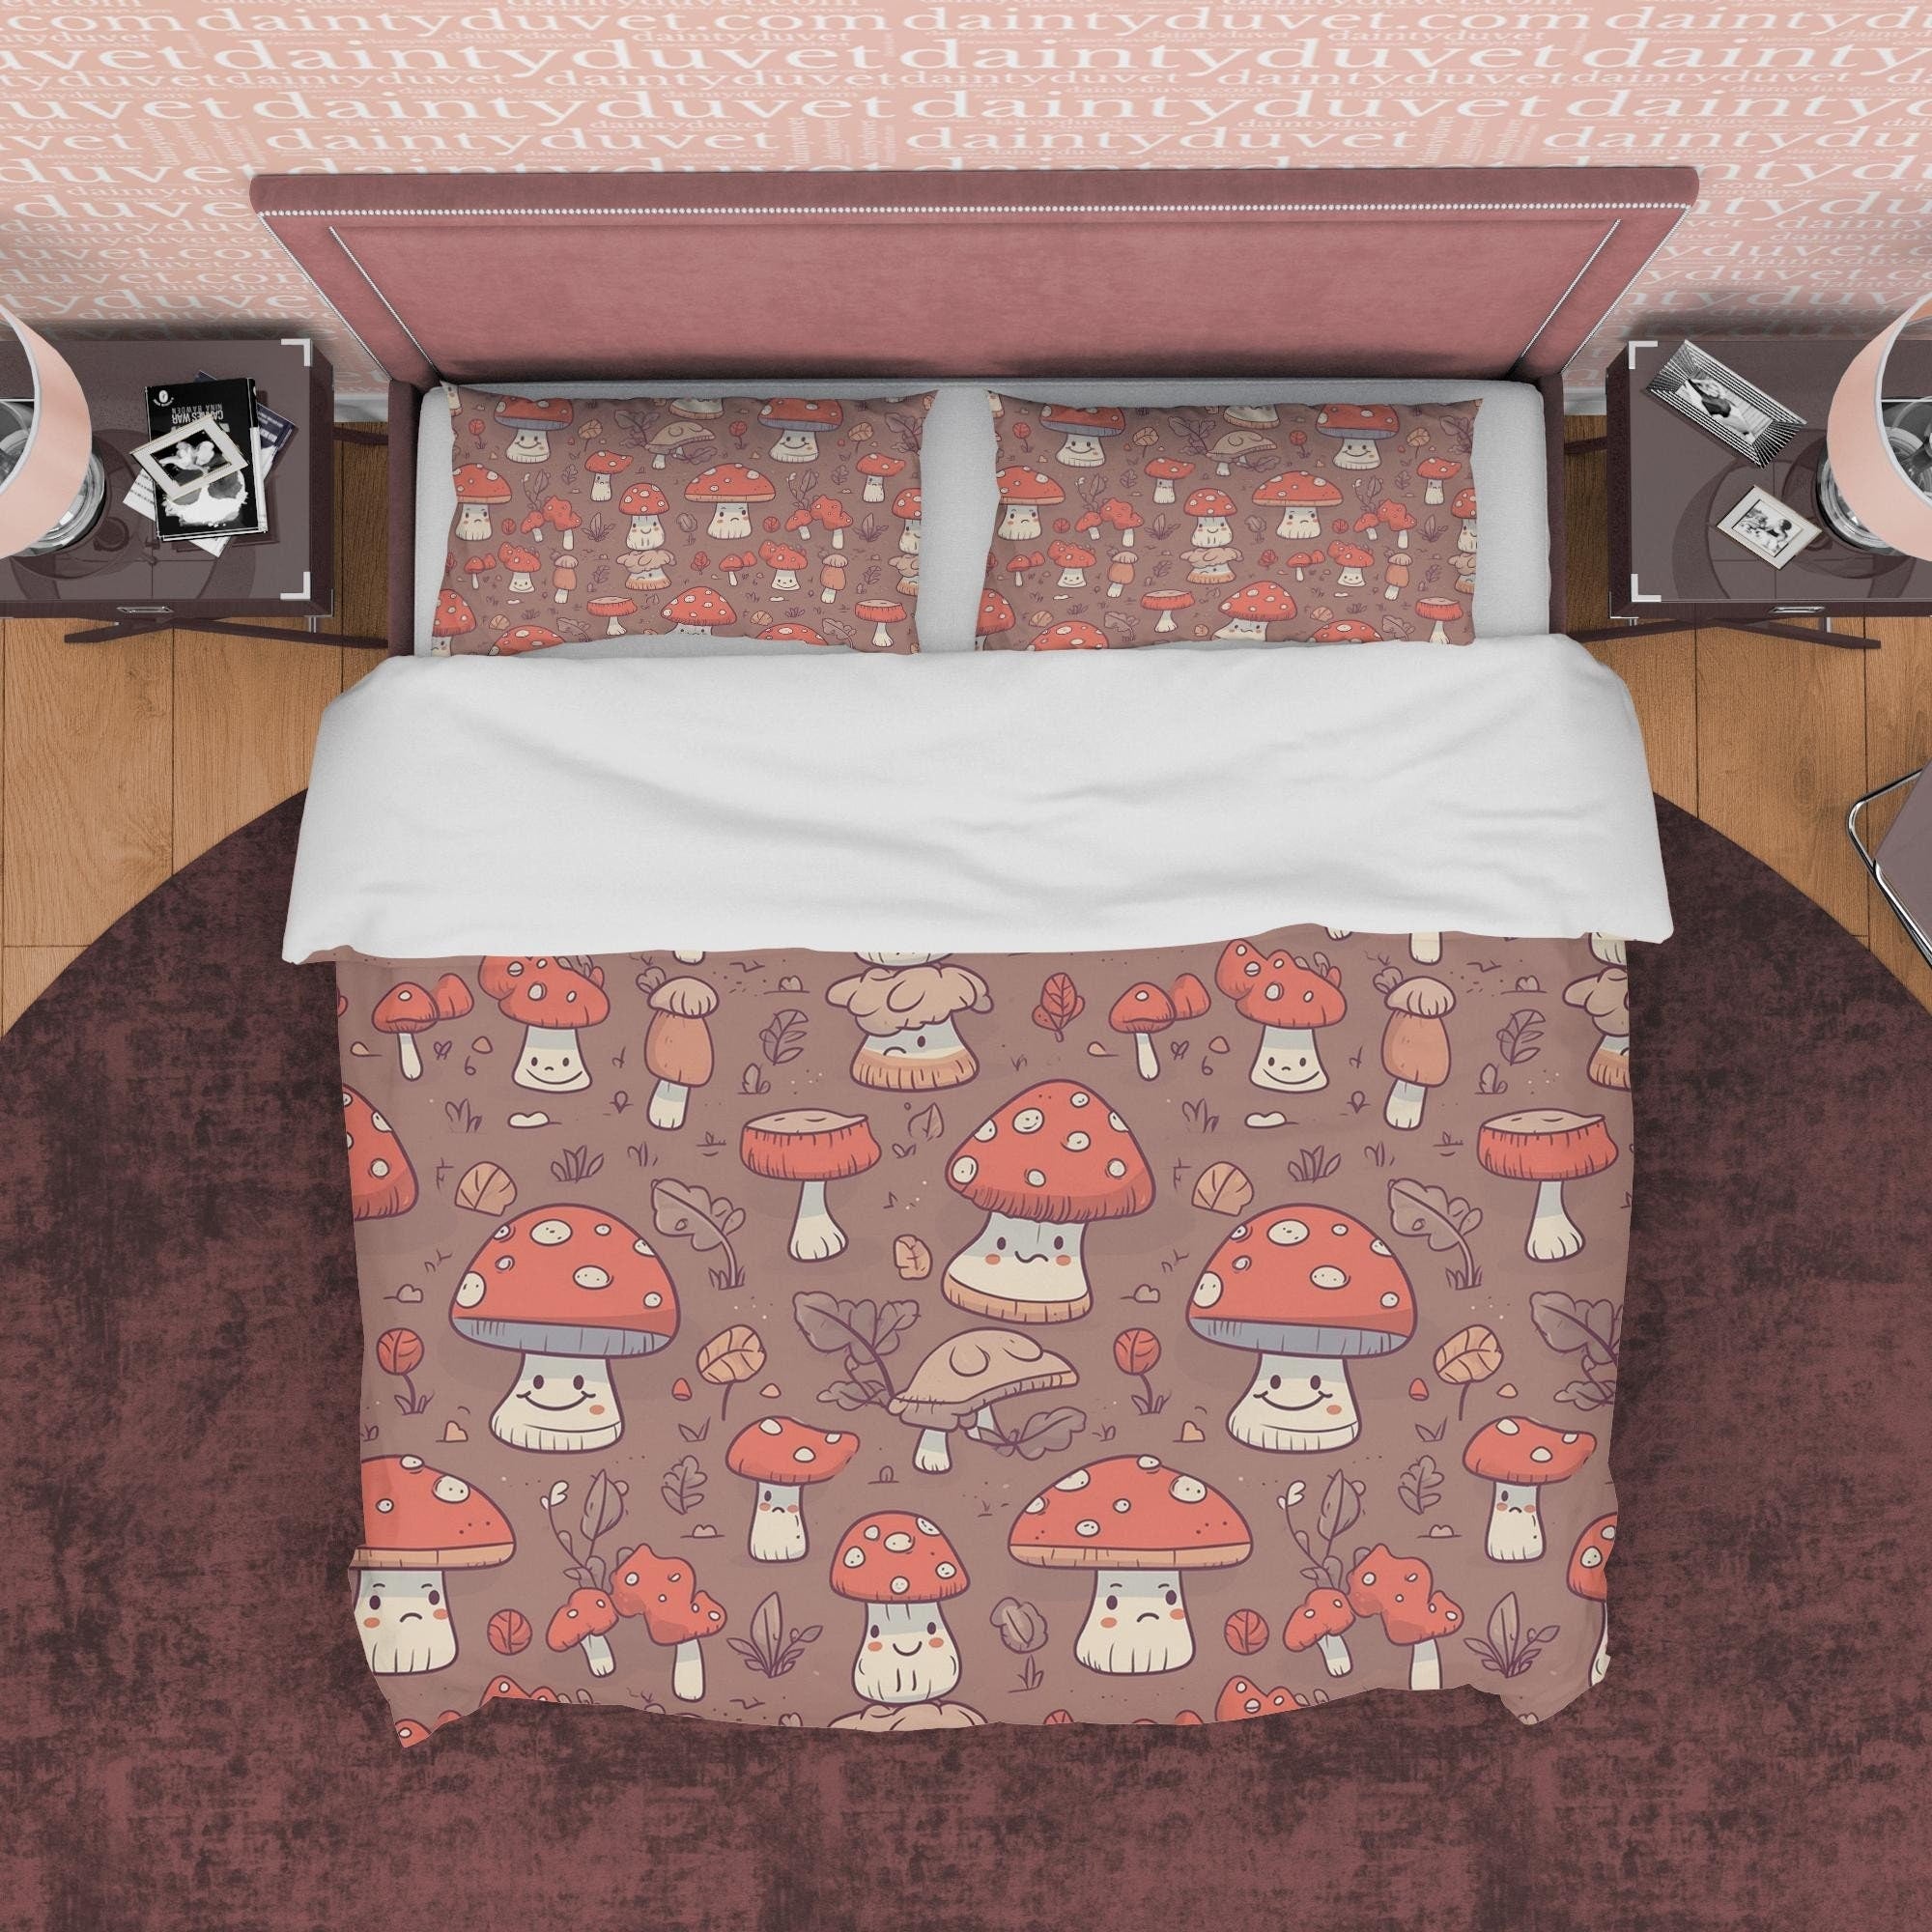 Choco Brown Retro Bedding Set, Mushroom Duvet Cover, Cute Toddler Room Quilt Cover, Unique Bedspread, Jolly Bed Cover, Zipper Bedding